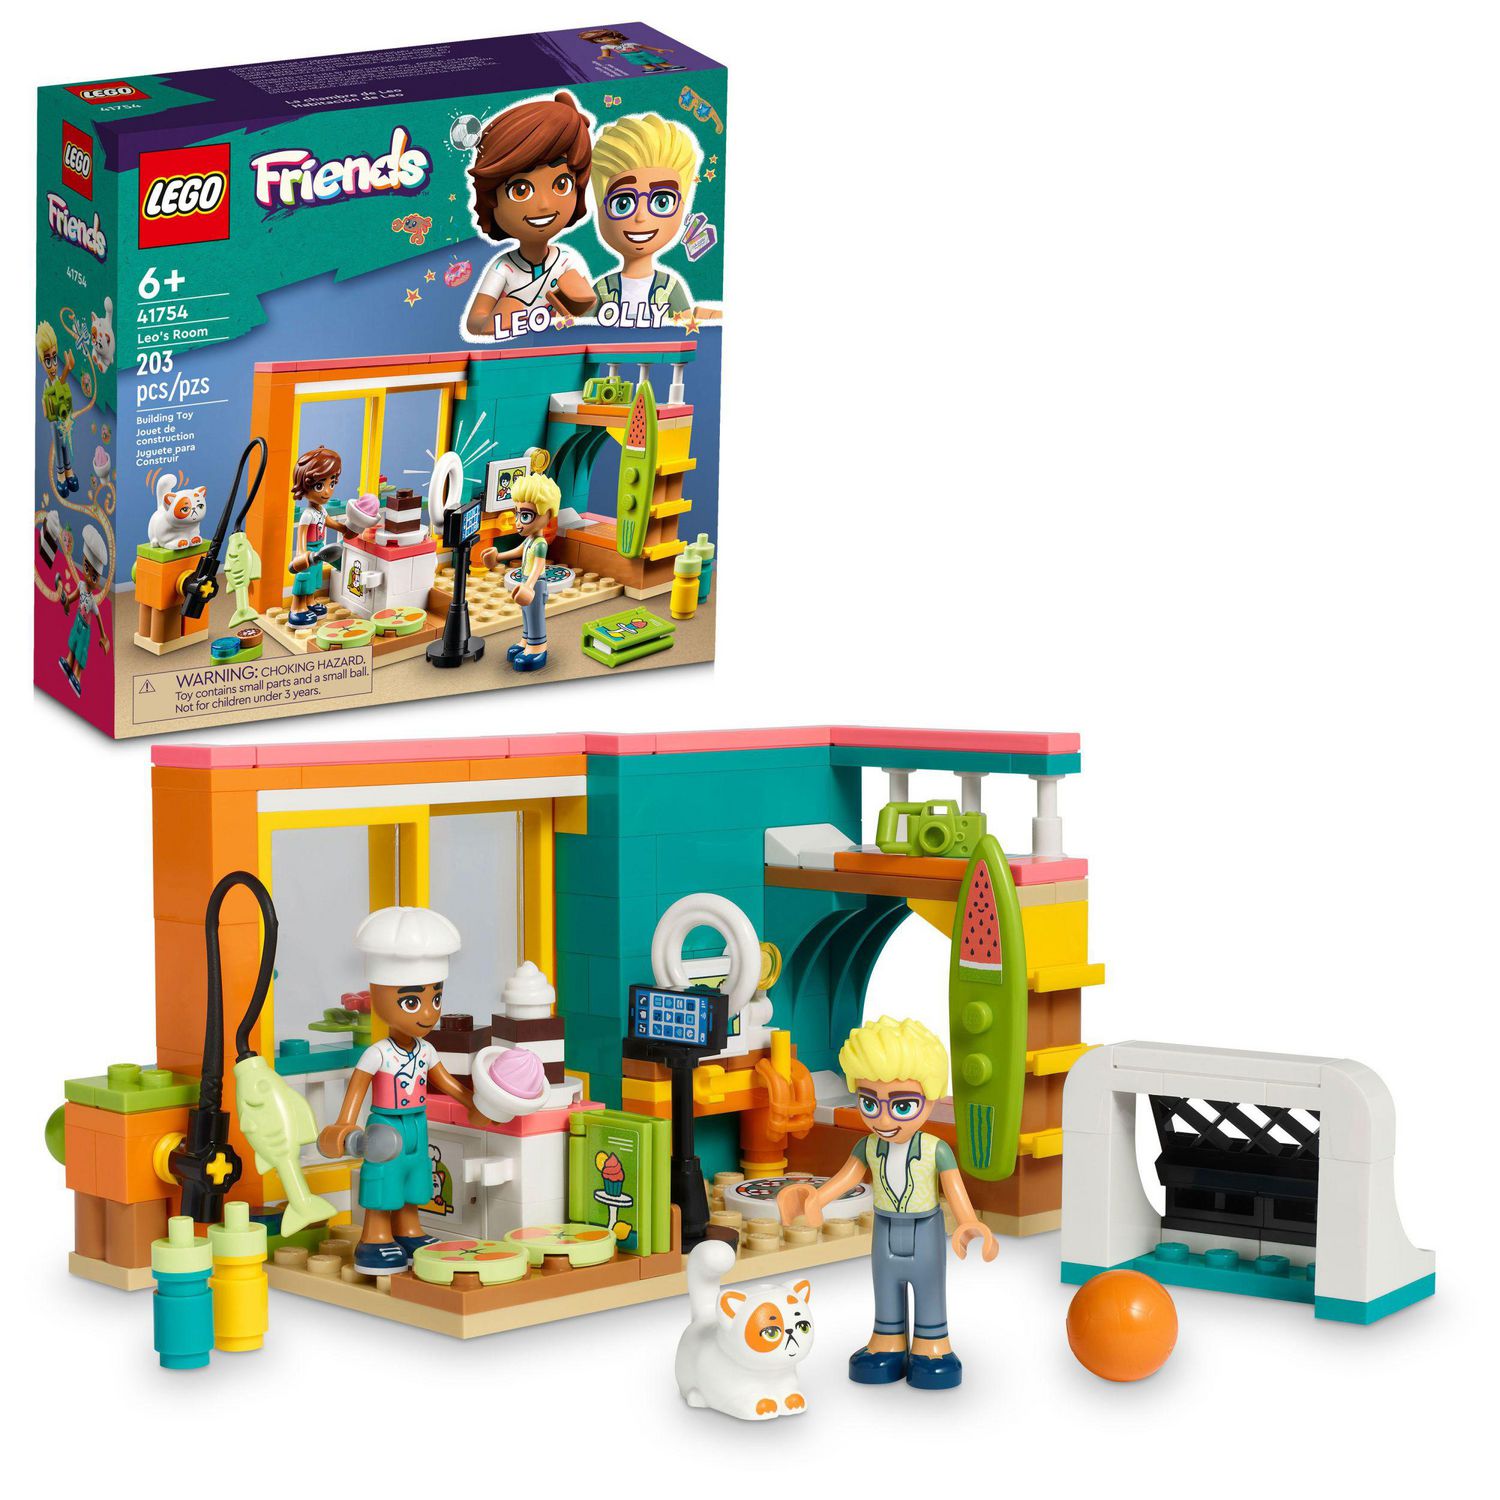 LEGO Friends Leo's Room 41754 Baking Themed Toy for Build and Play